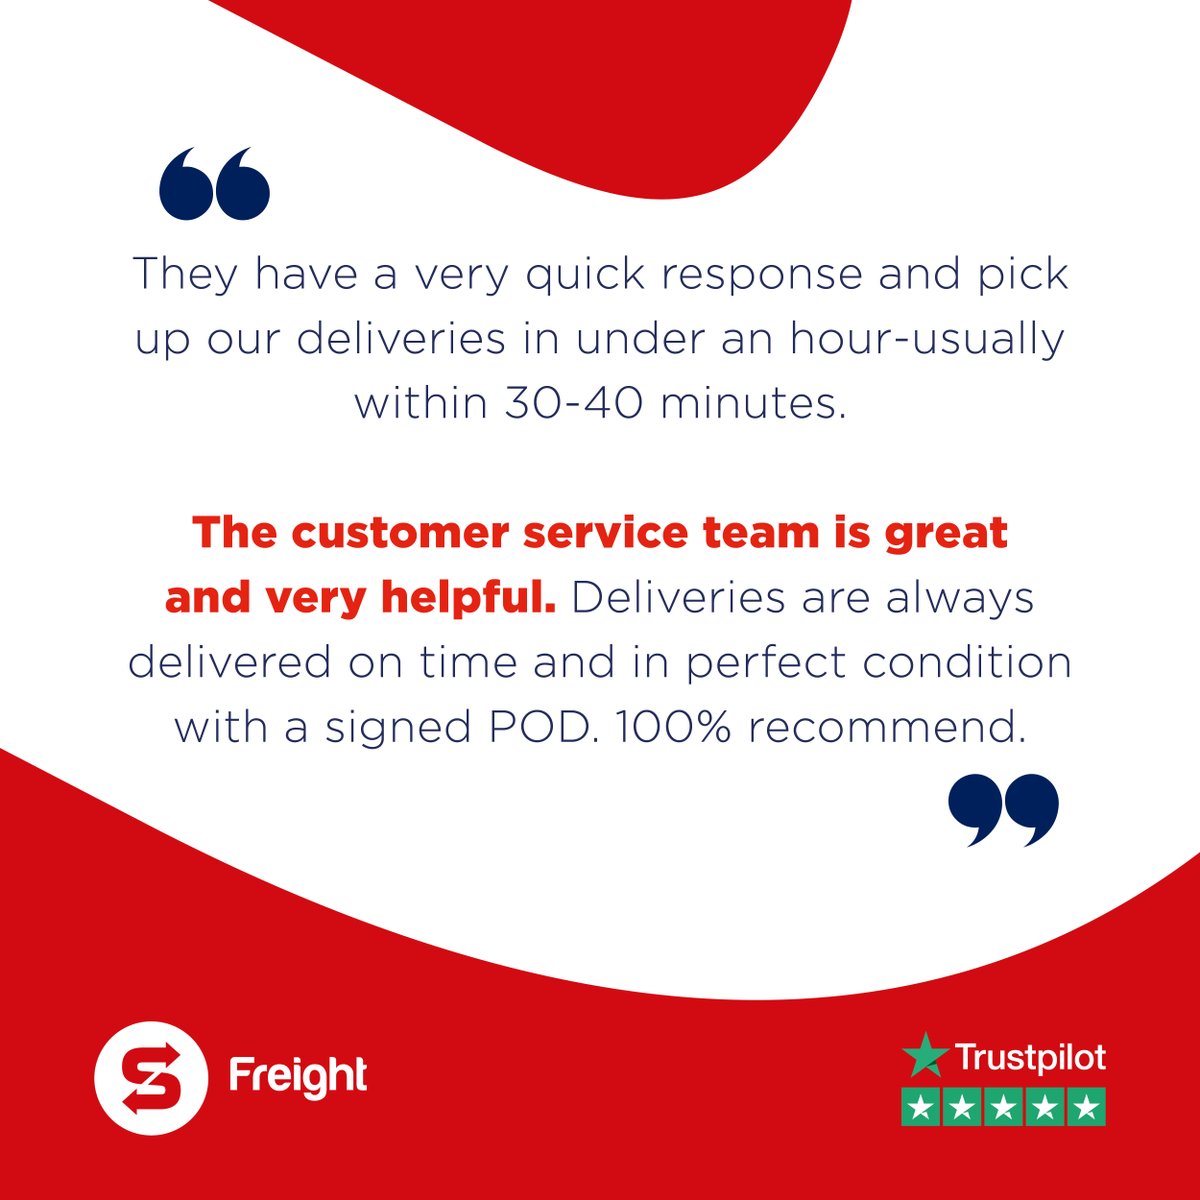 We’re not just Speedy by name—when you book a same day delivery with us, we aim to pick up your consignment within 60 minutes or less, so your goods can reach their destination as quickly as possible. ➡️ Get a quote now: hubs.la/Q02yf6TW0